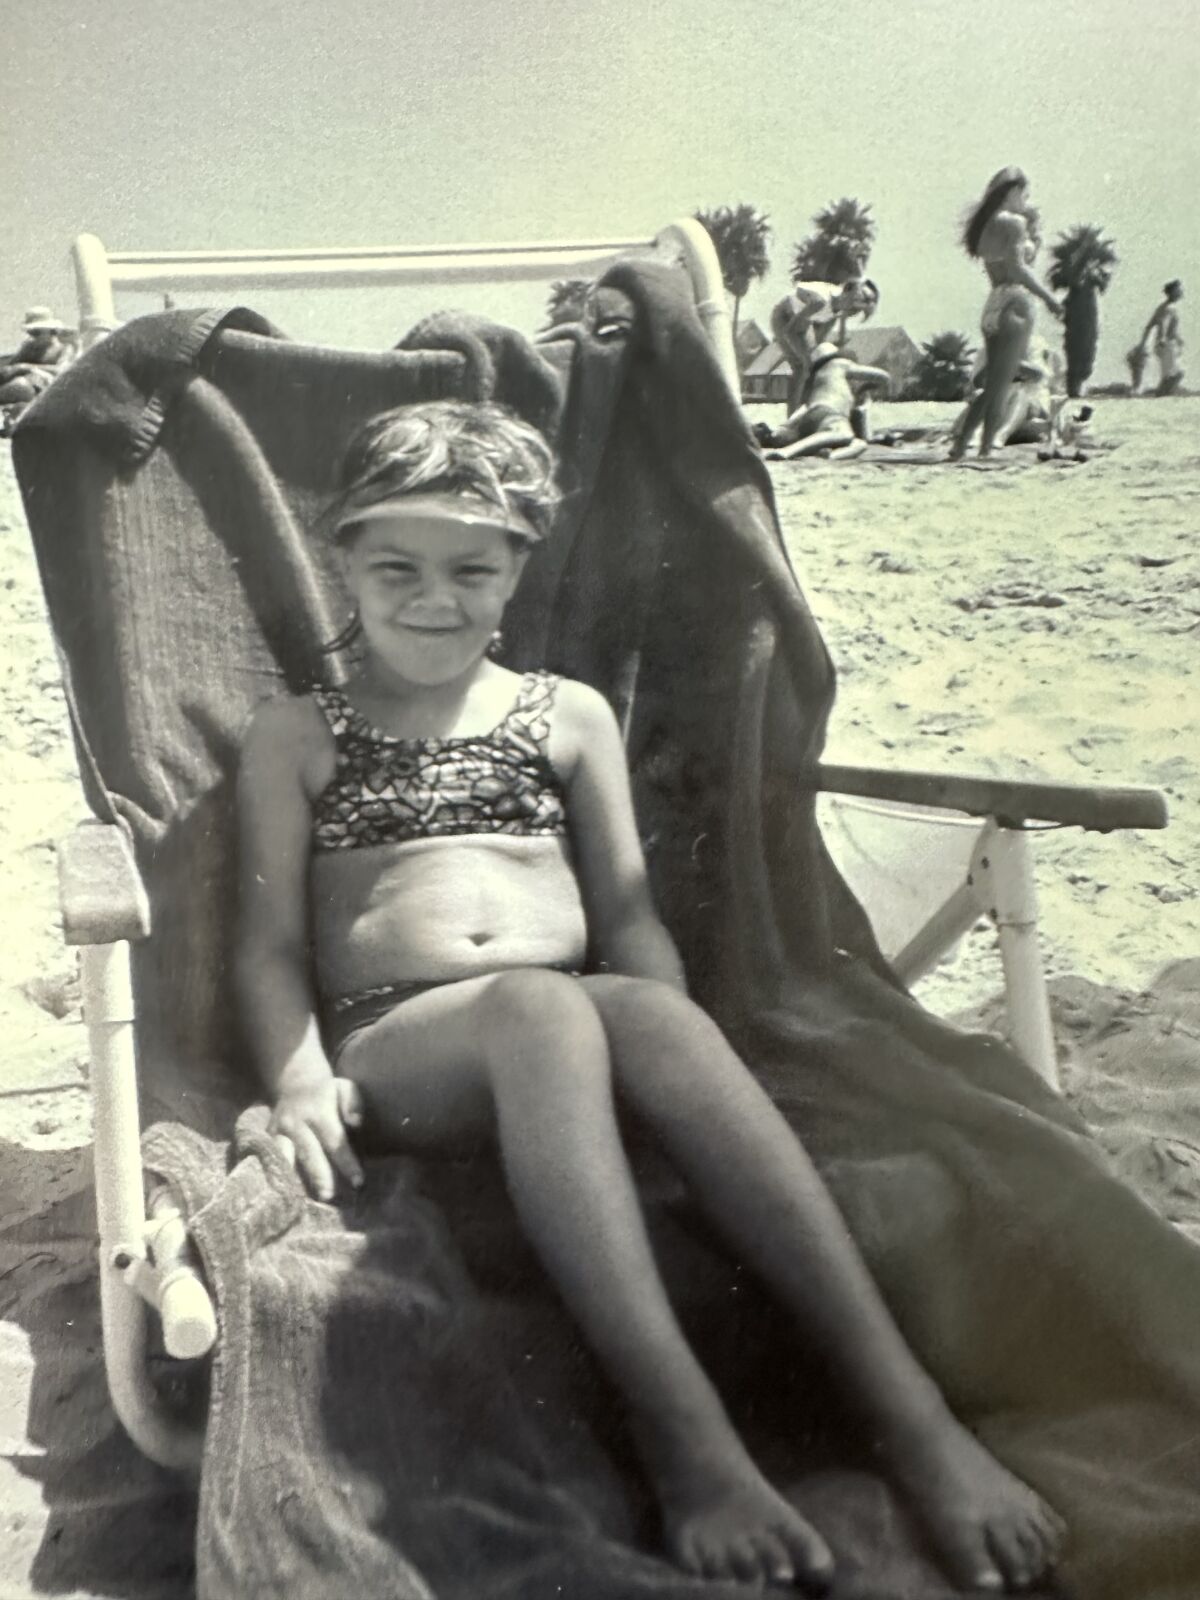 OB native Haley Smith, pictured at age 6, says hanging out at the beach enabled her to get to know all kinds of people.